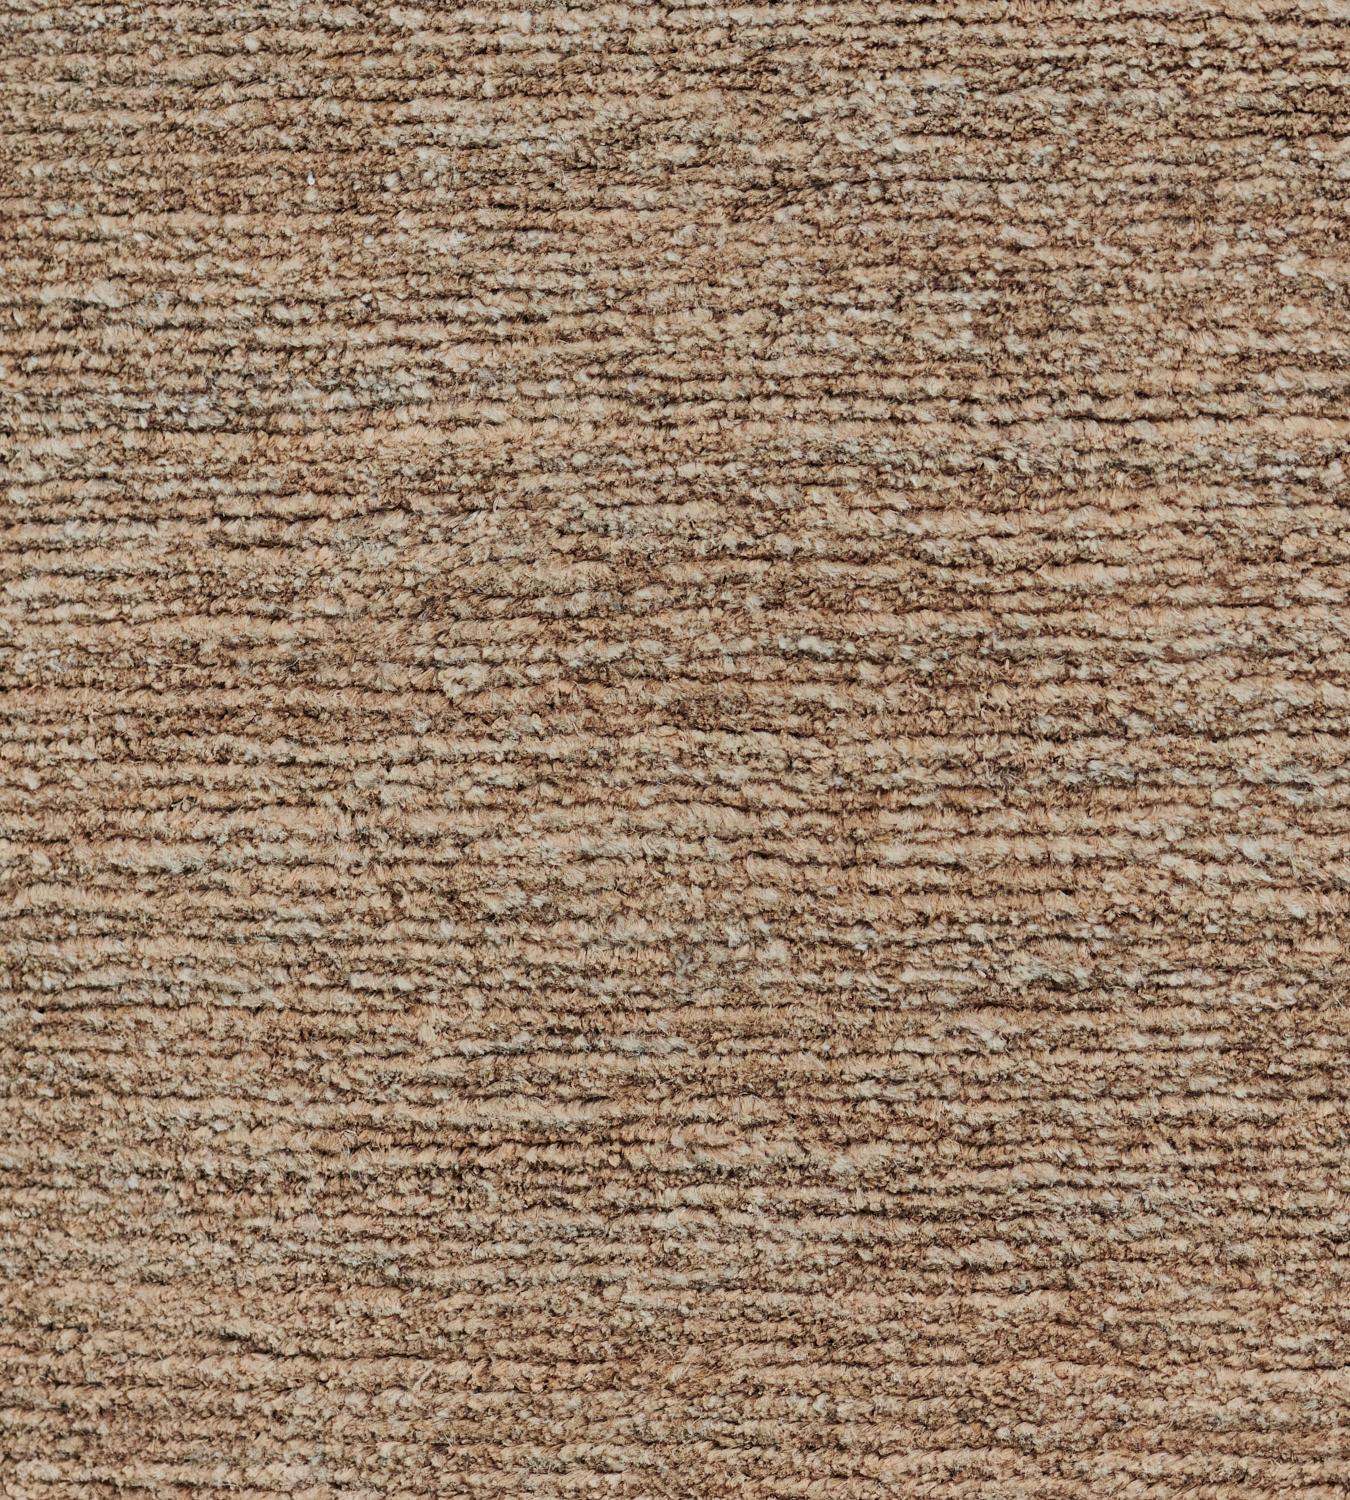 Part of the Mansour Modern collection, this hemp rug is handwoven by master weavers using the finest quality techniques and all-natural materials.